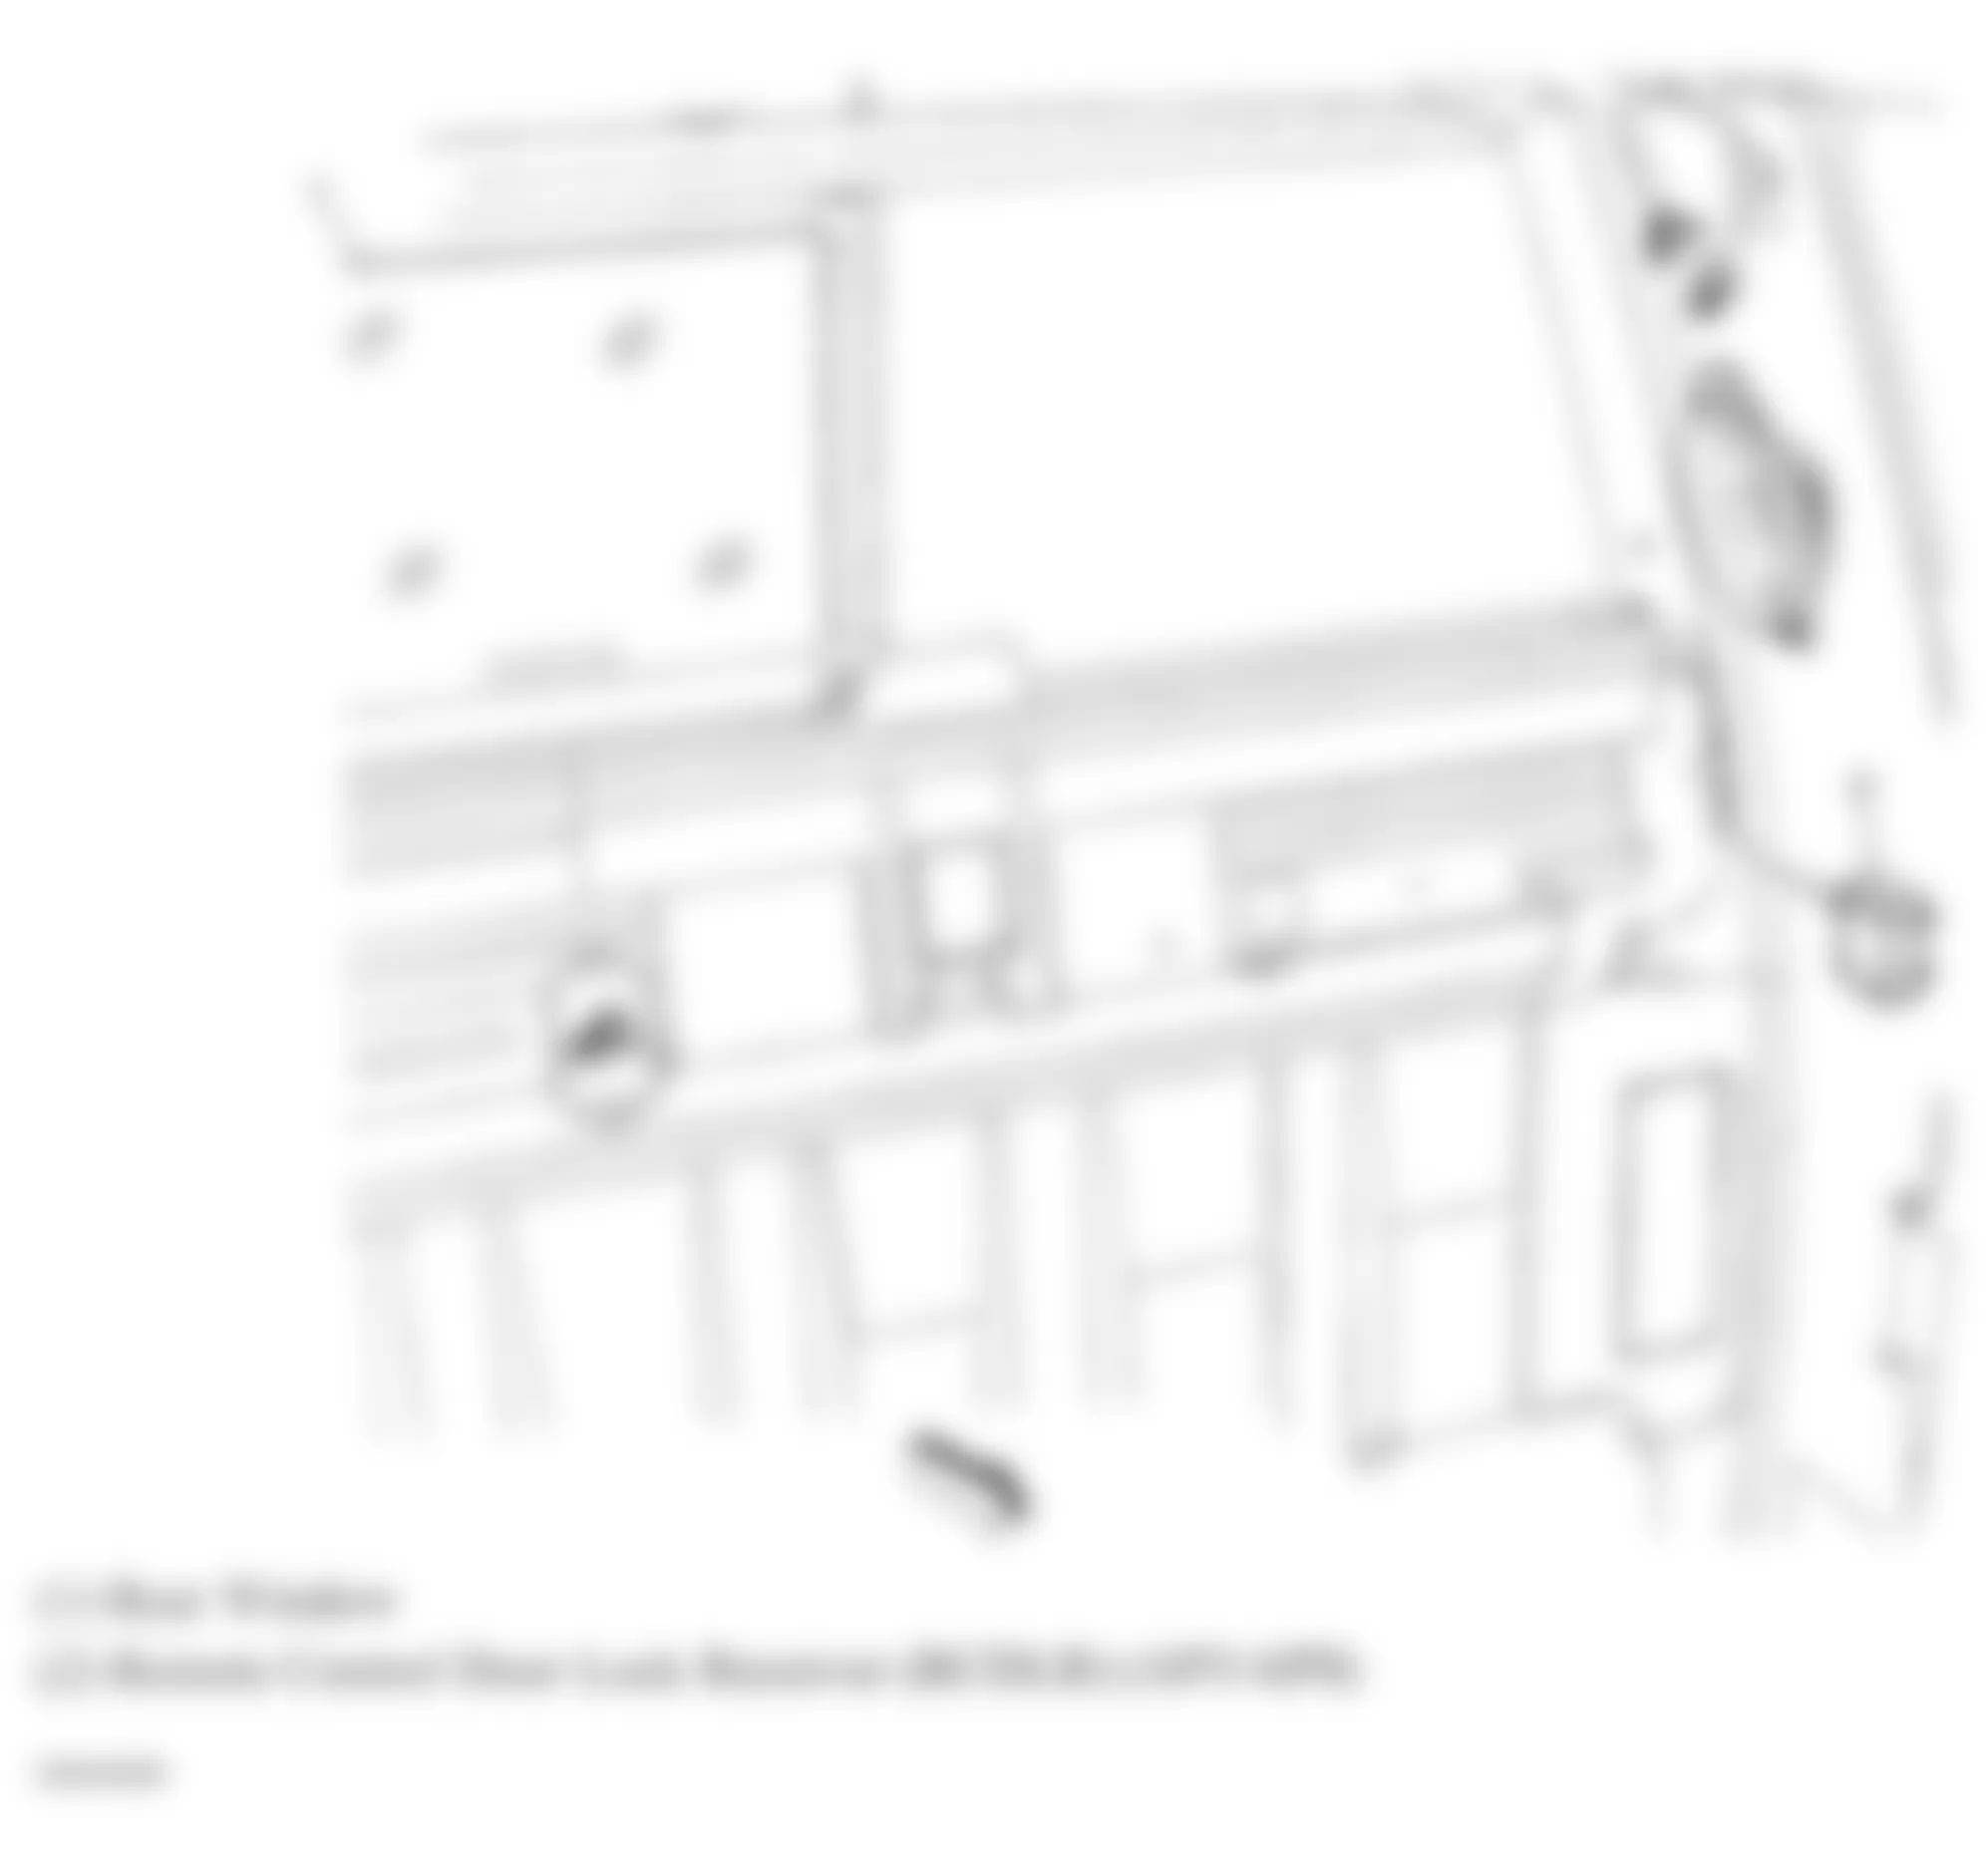 GMC Sierra 3500 HD 2007 - Component Locations -  Left Rear Of Passenger Compartment